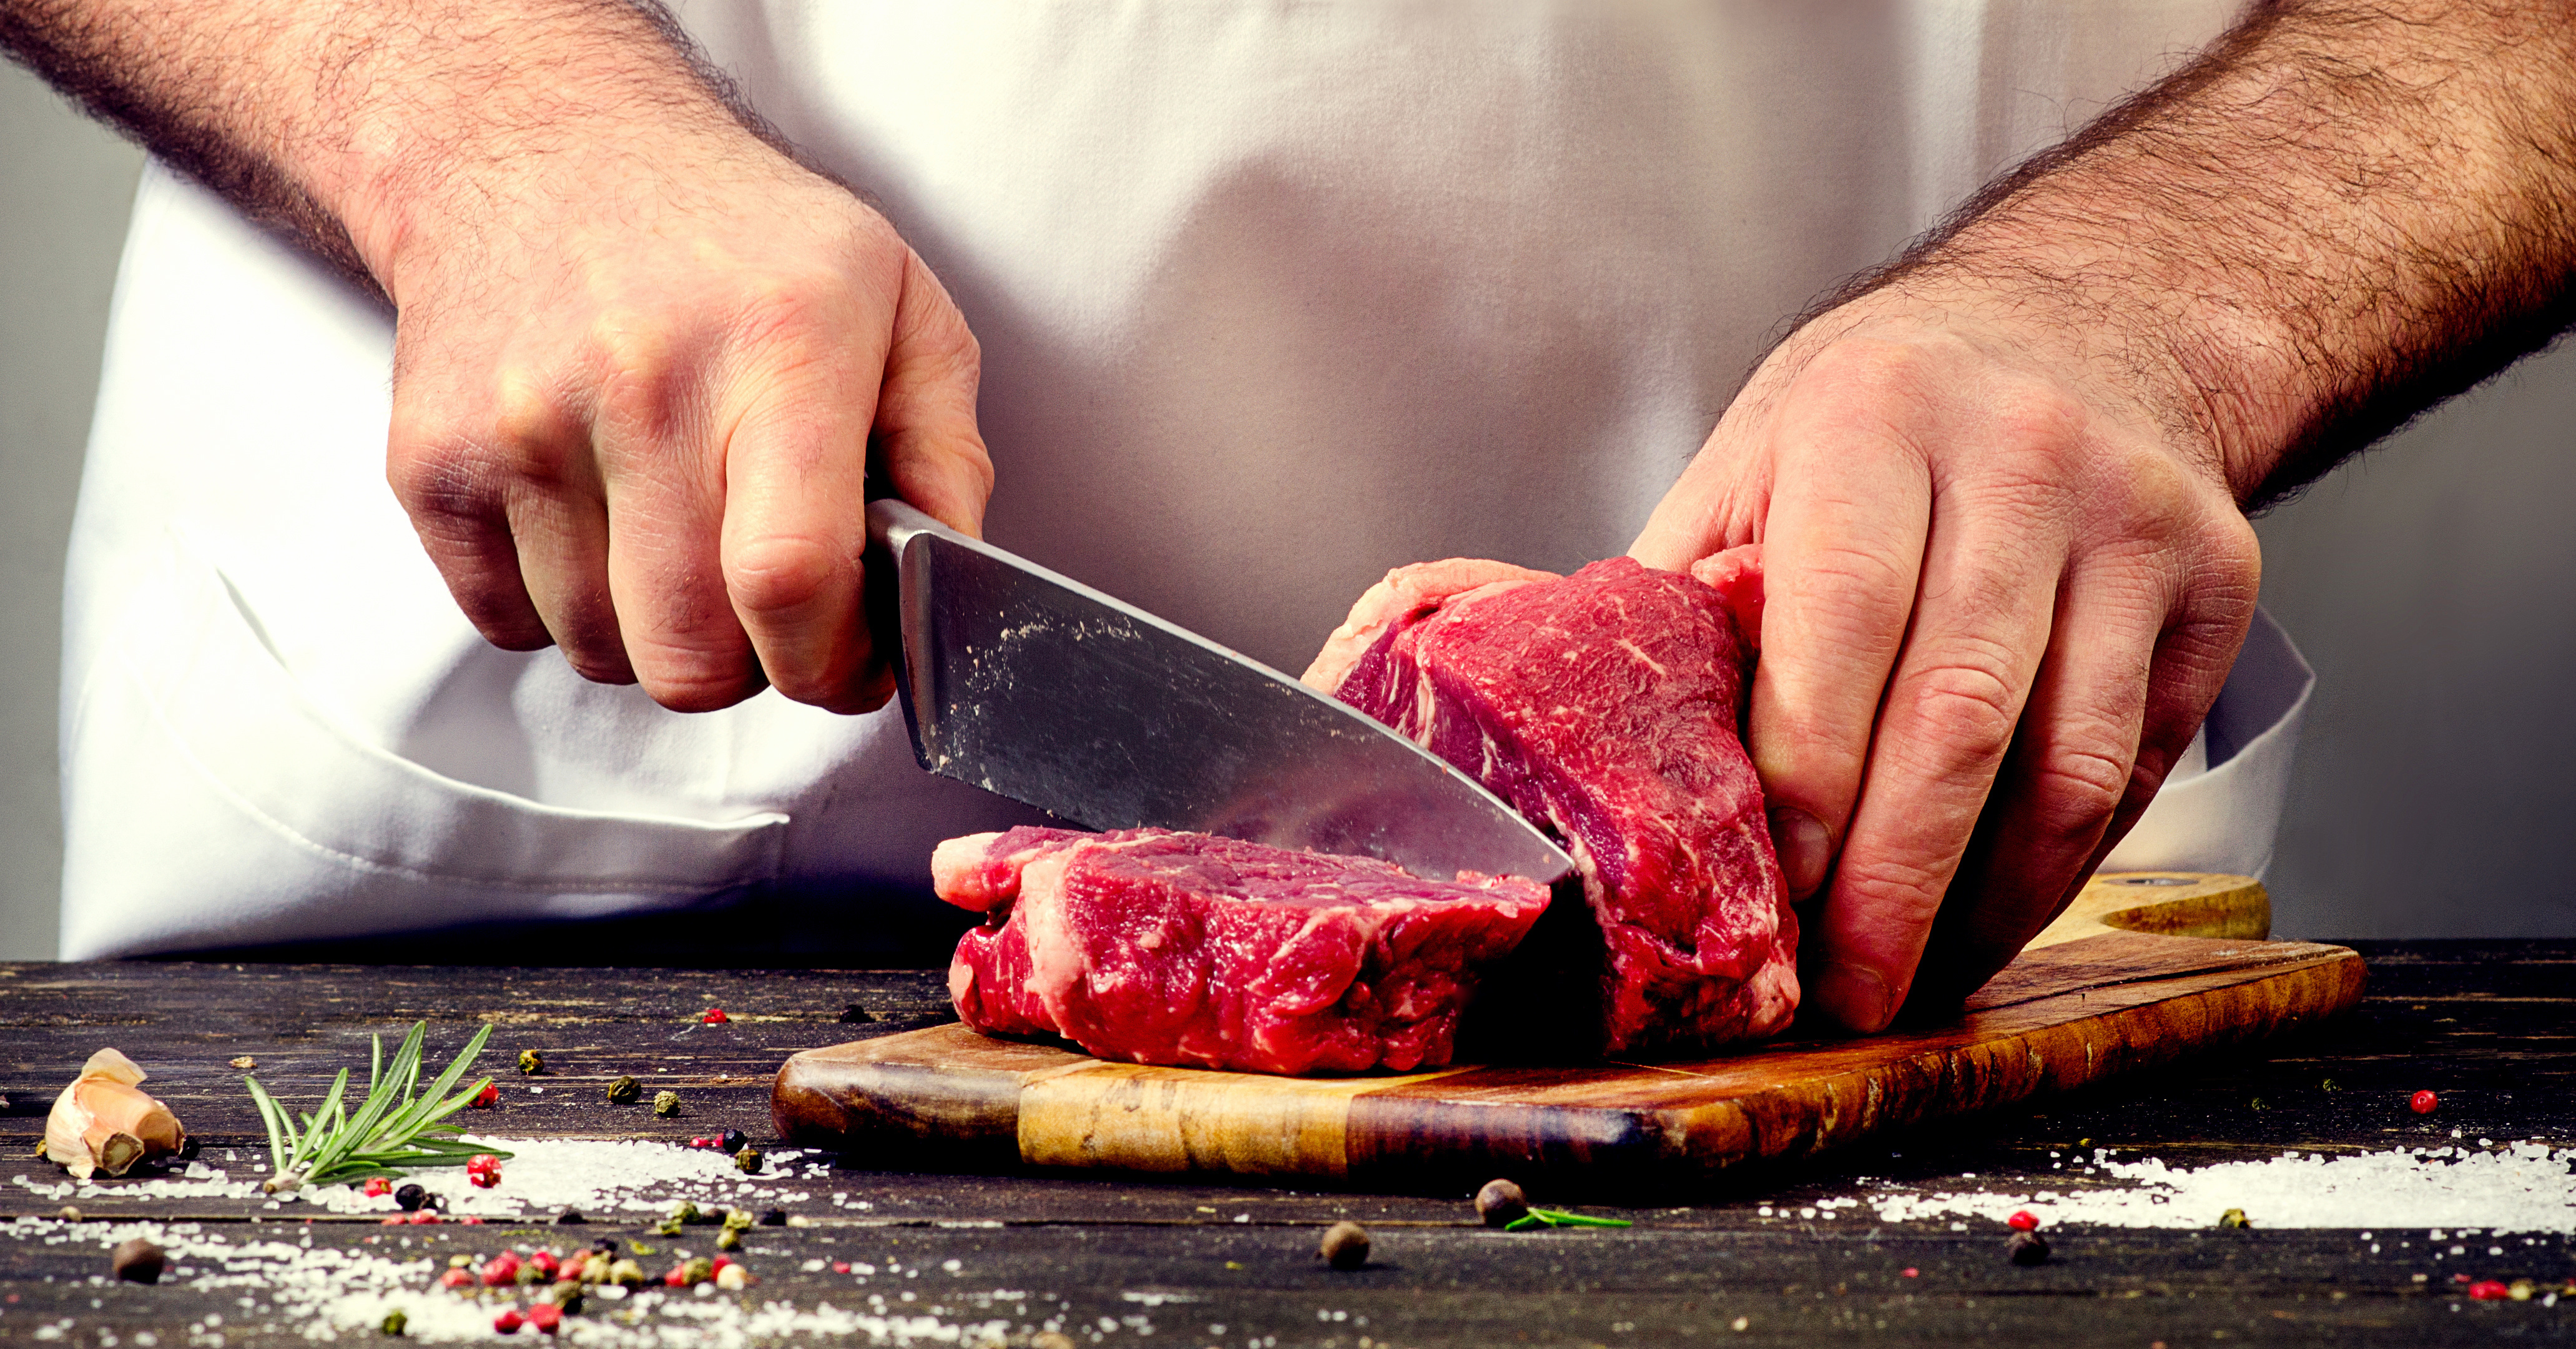 Red Meat: The Beef Among the Scientific Community